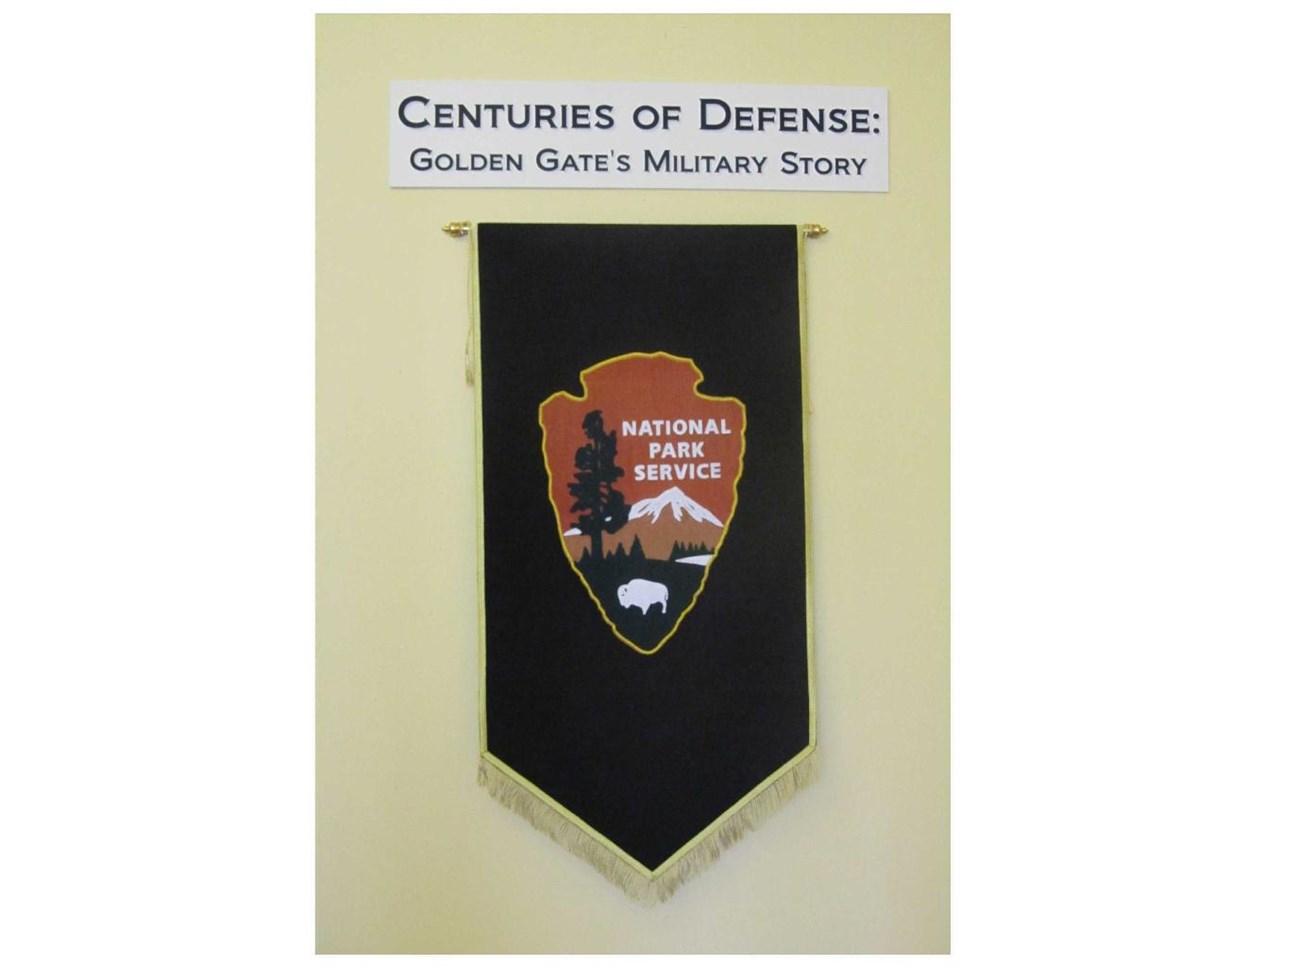 Centuries of Defense: Golden Gate's Military Story